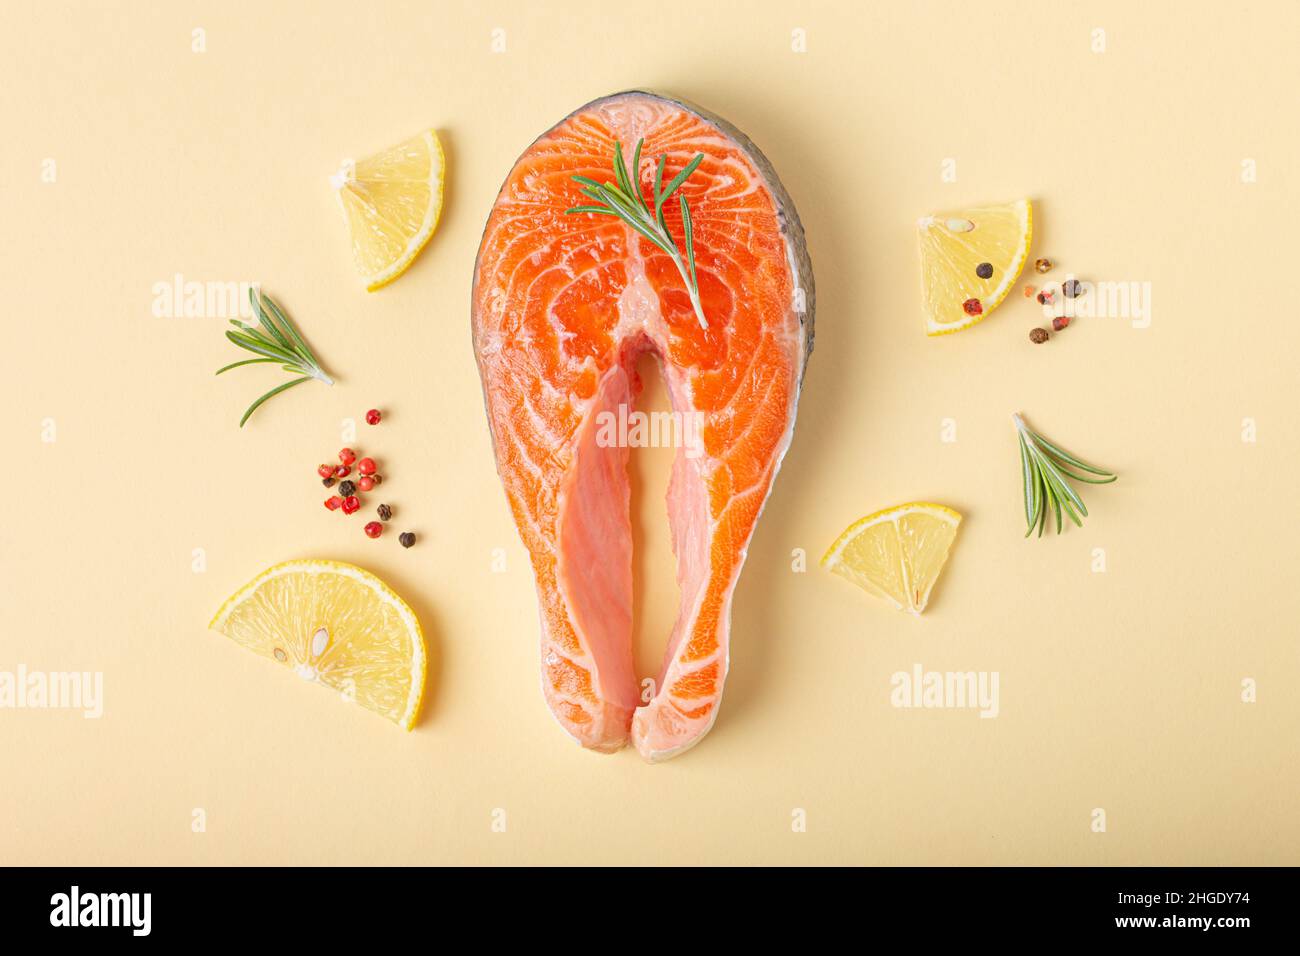 Raw fresh fish salmon steak top view on beige pastel background from above Stock Photo